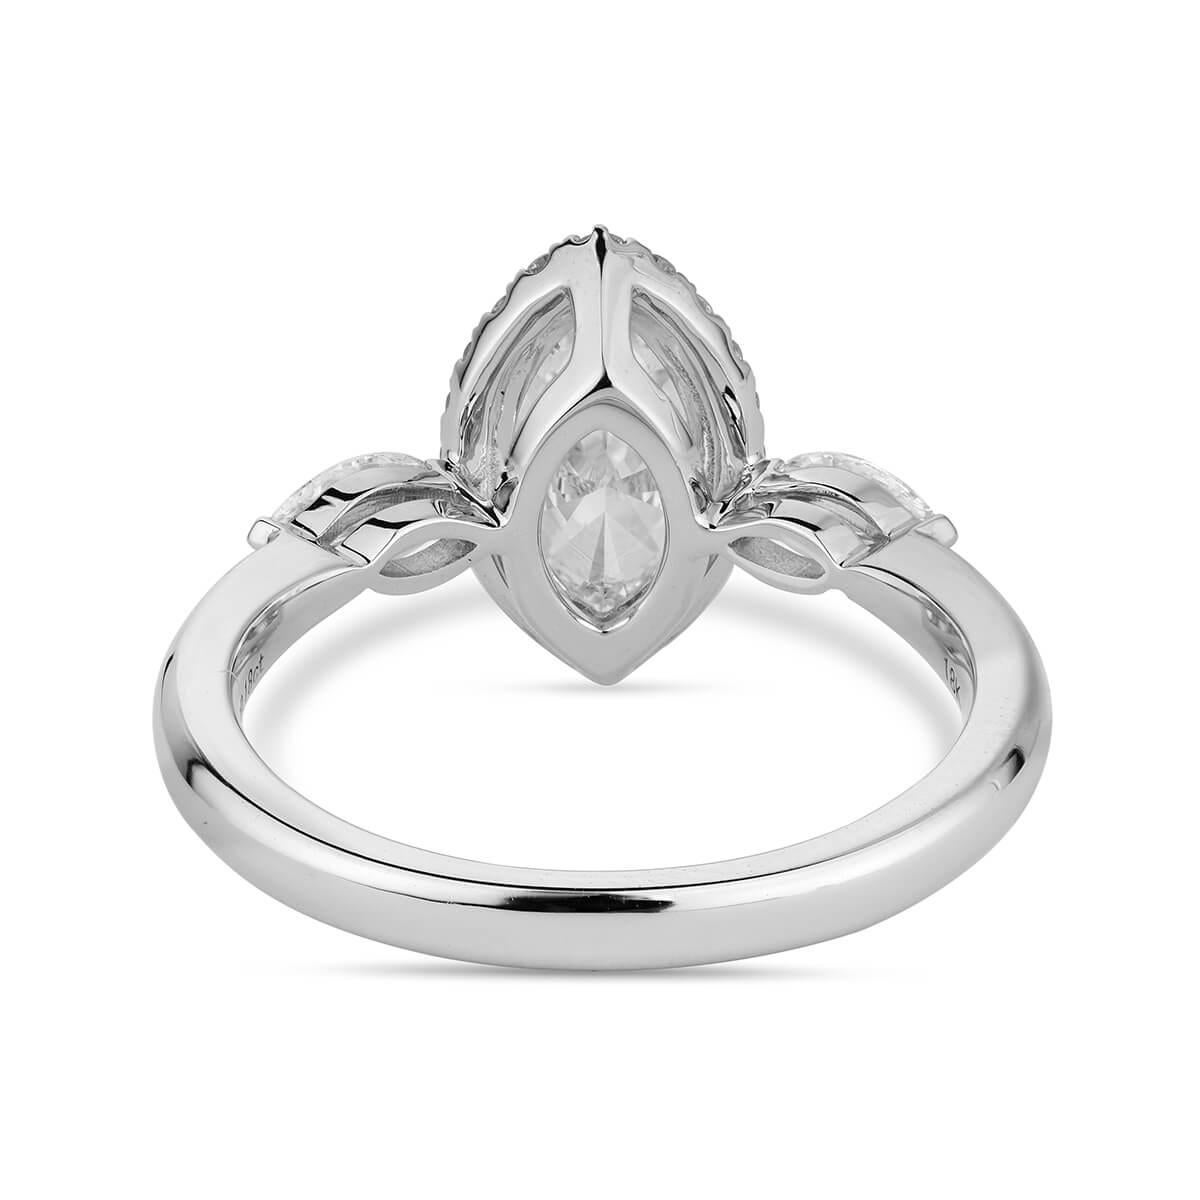 Women's or Men's GIA Certified Natural Untreated 1.43 Carat White Diamond Engagement Wedding Ring For Sale